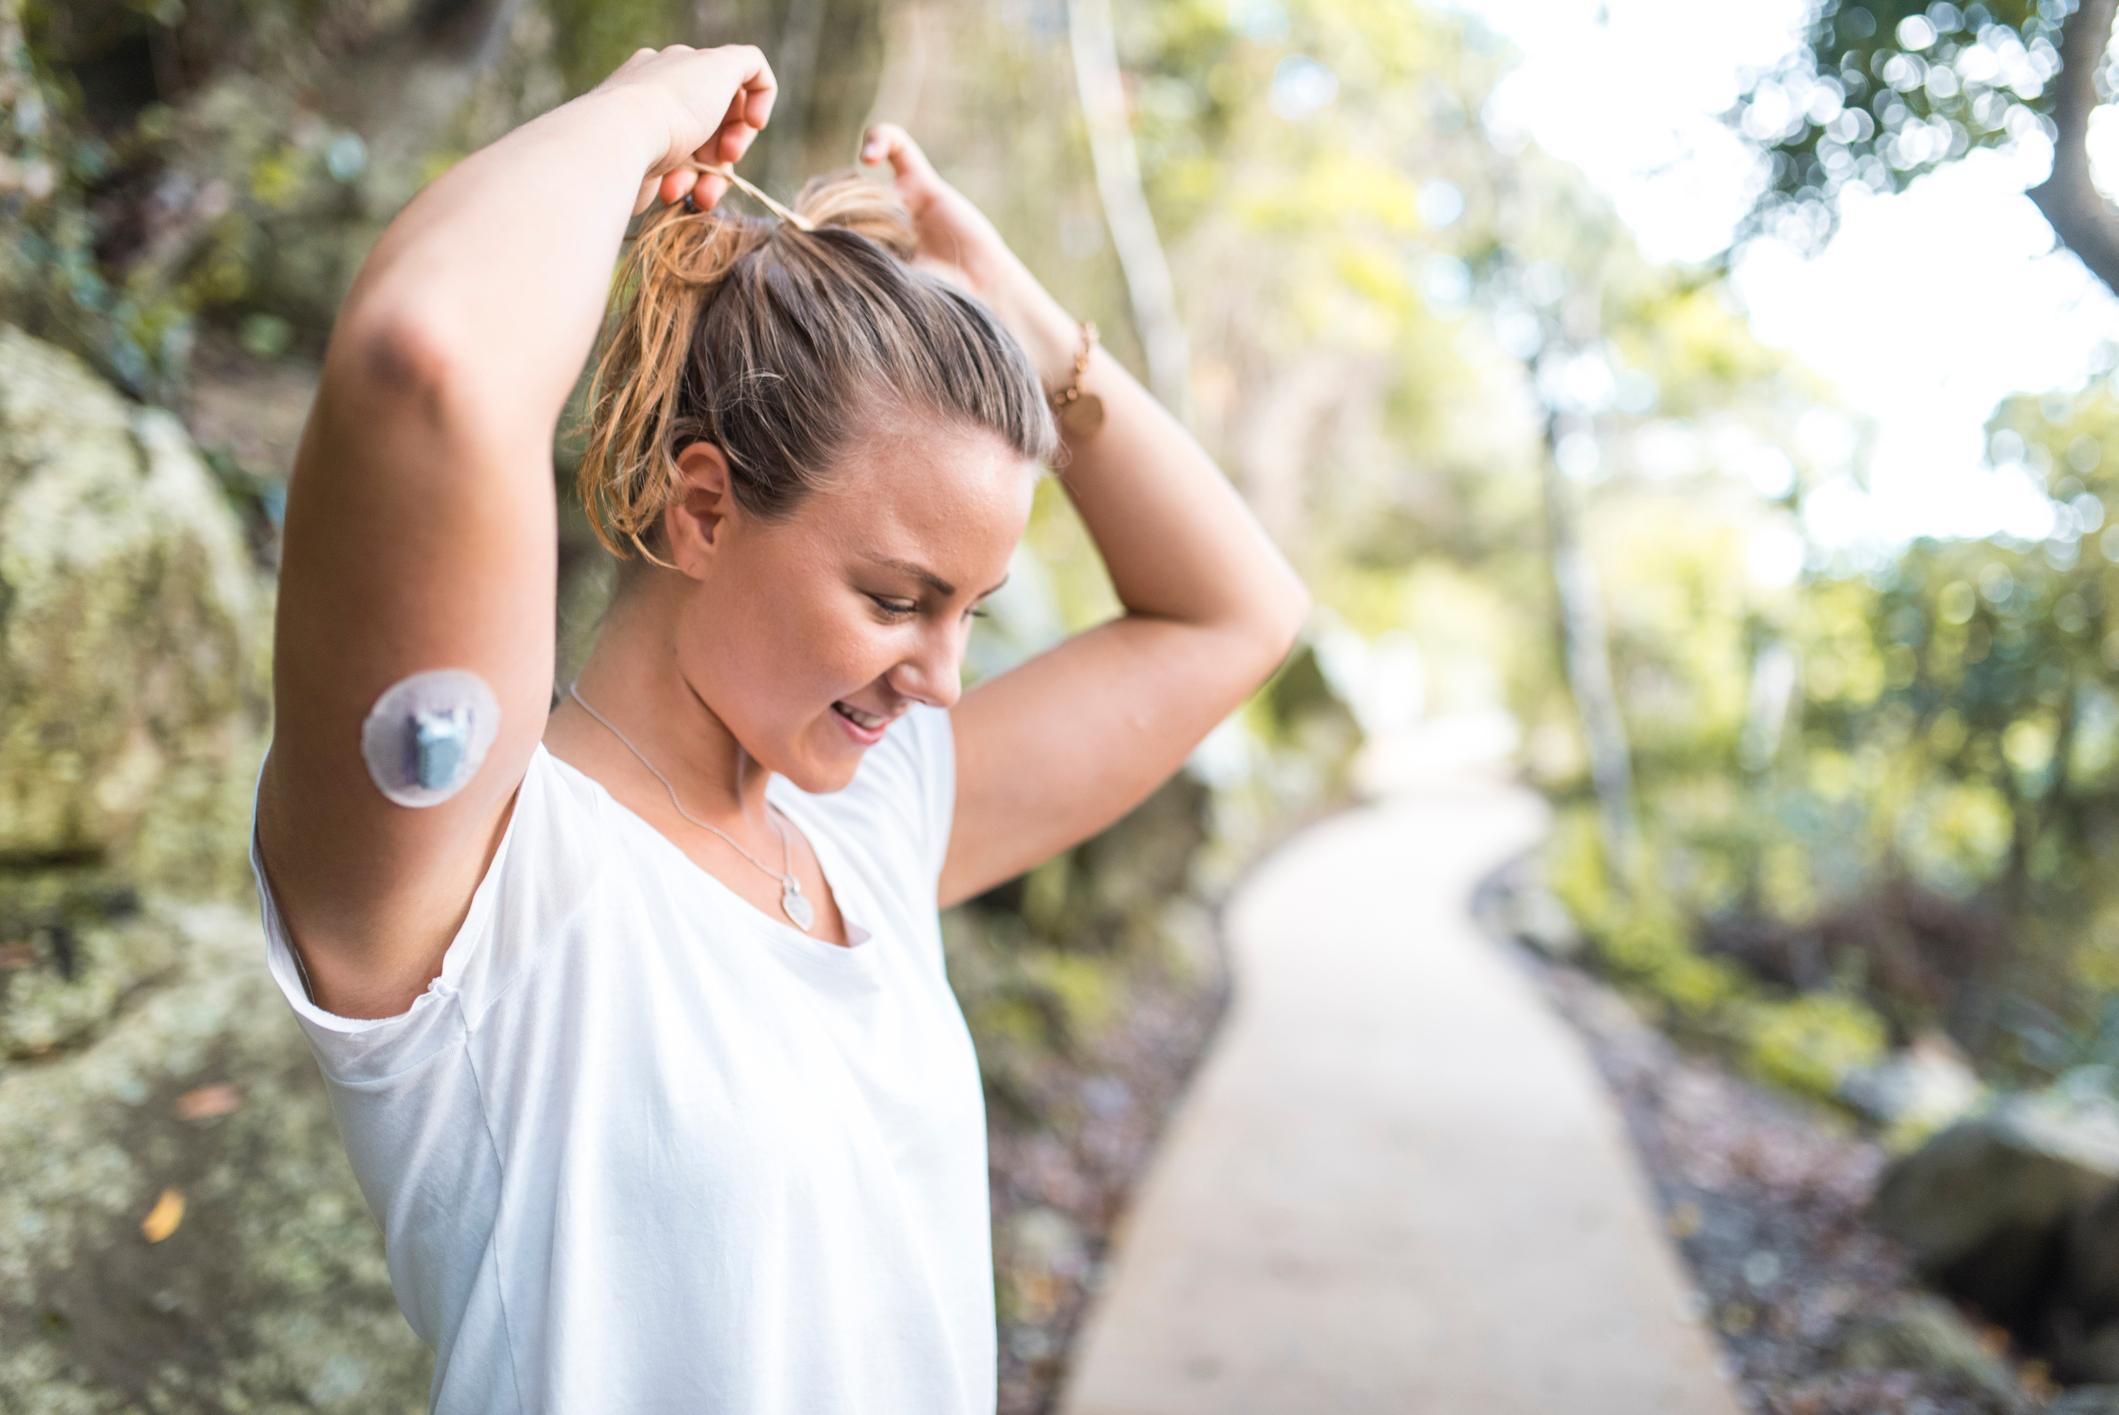 Woman exercising with continuous glucose monitor on arm